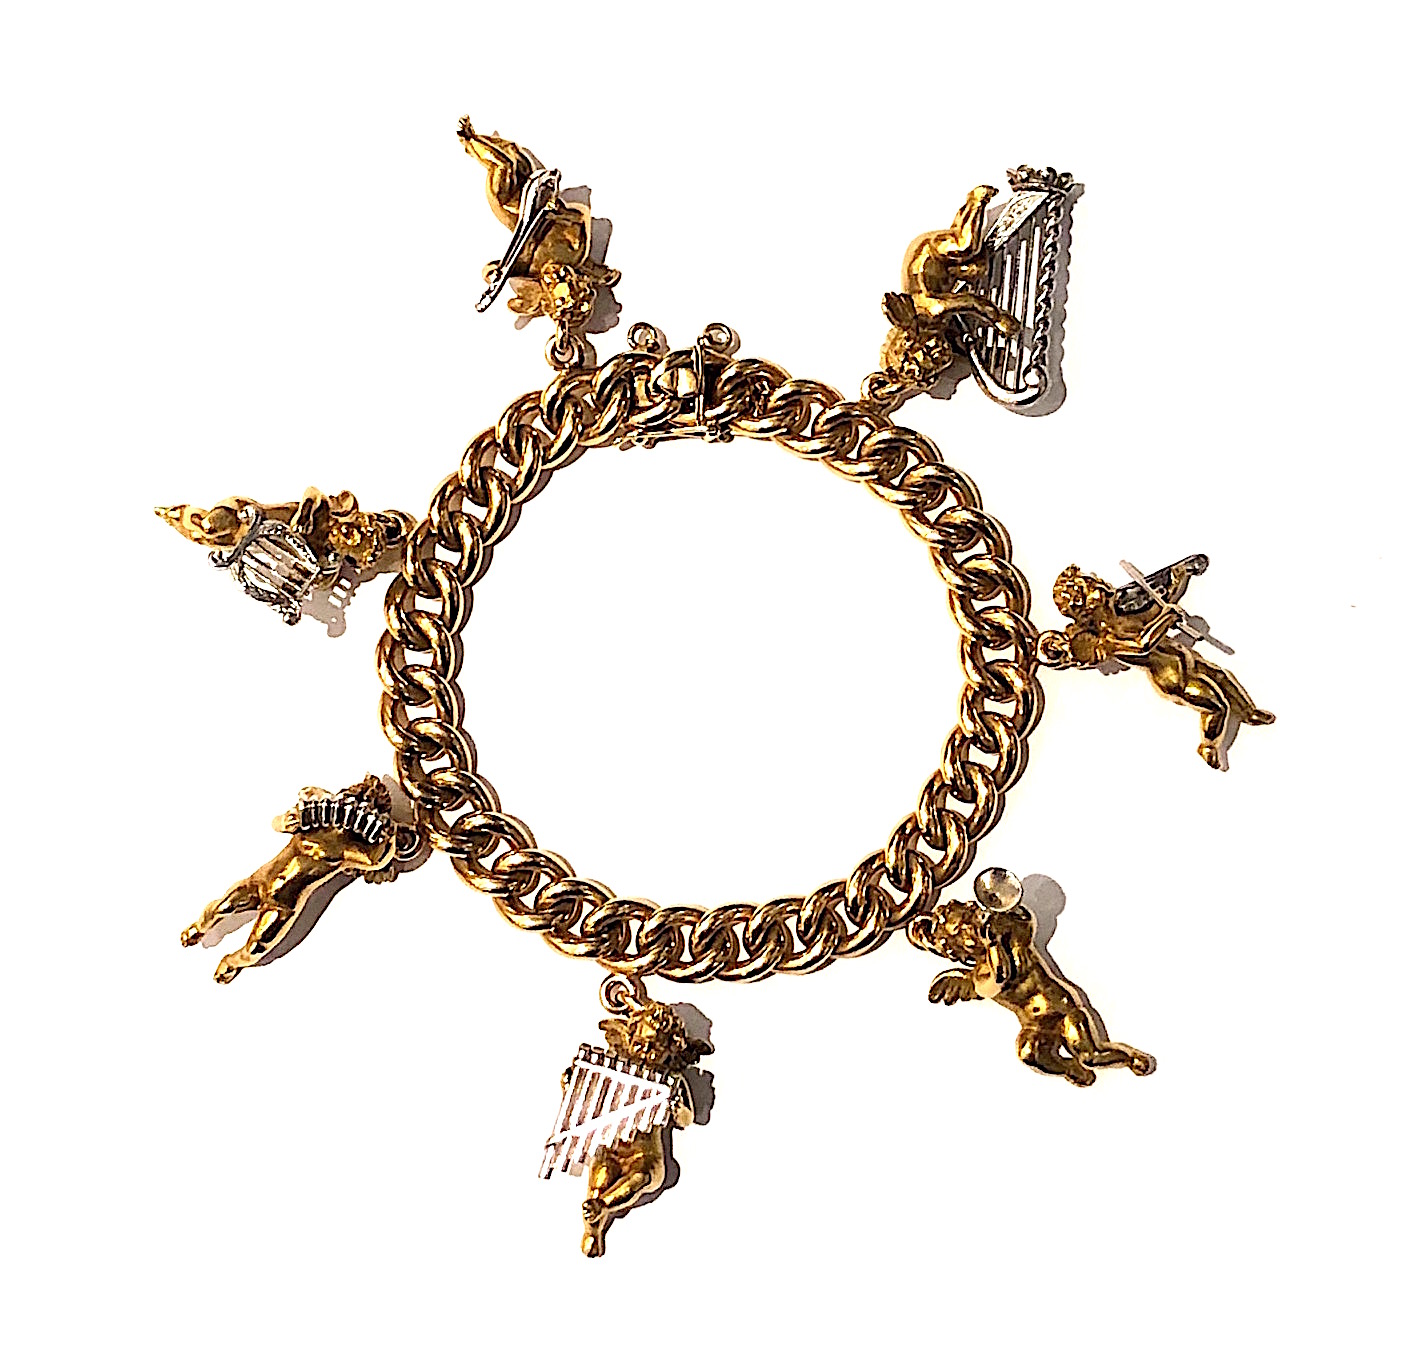 Enrico Serafini, (1913-1968) Italy “Cupid Orchestra” charm bracelet, 18k gold finely detailed cupid figures playing a variety of musical instruments in platinum all on a solid 18k gold link bracelet, touchmark,c.1950